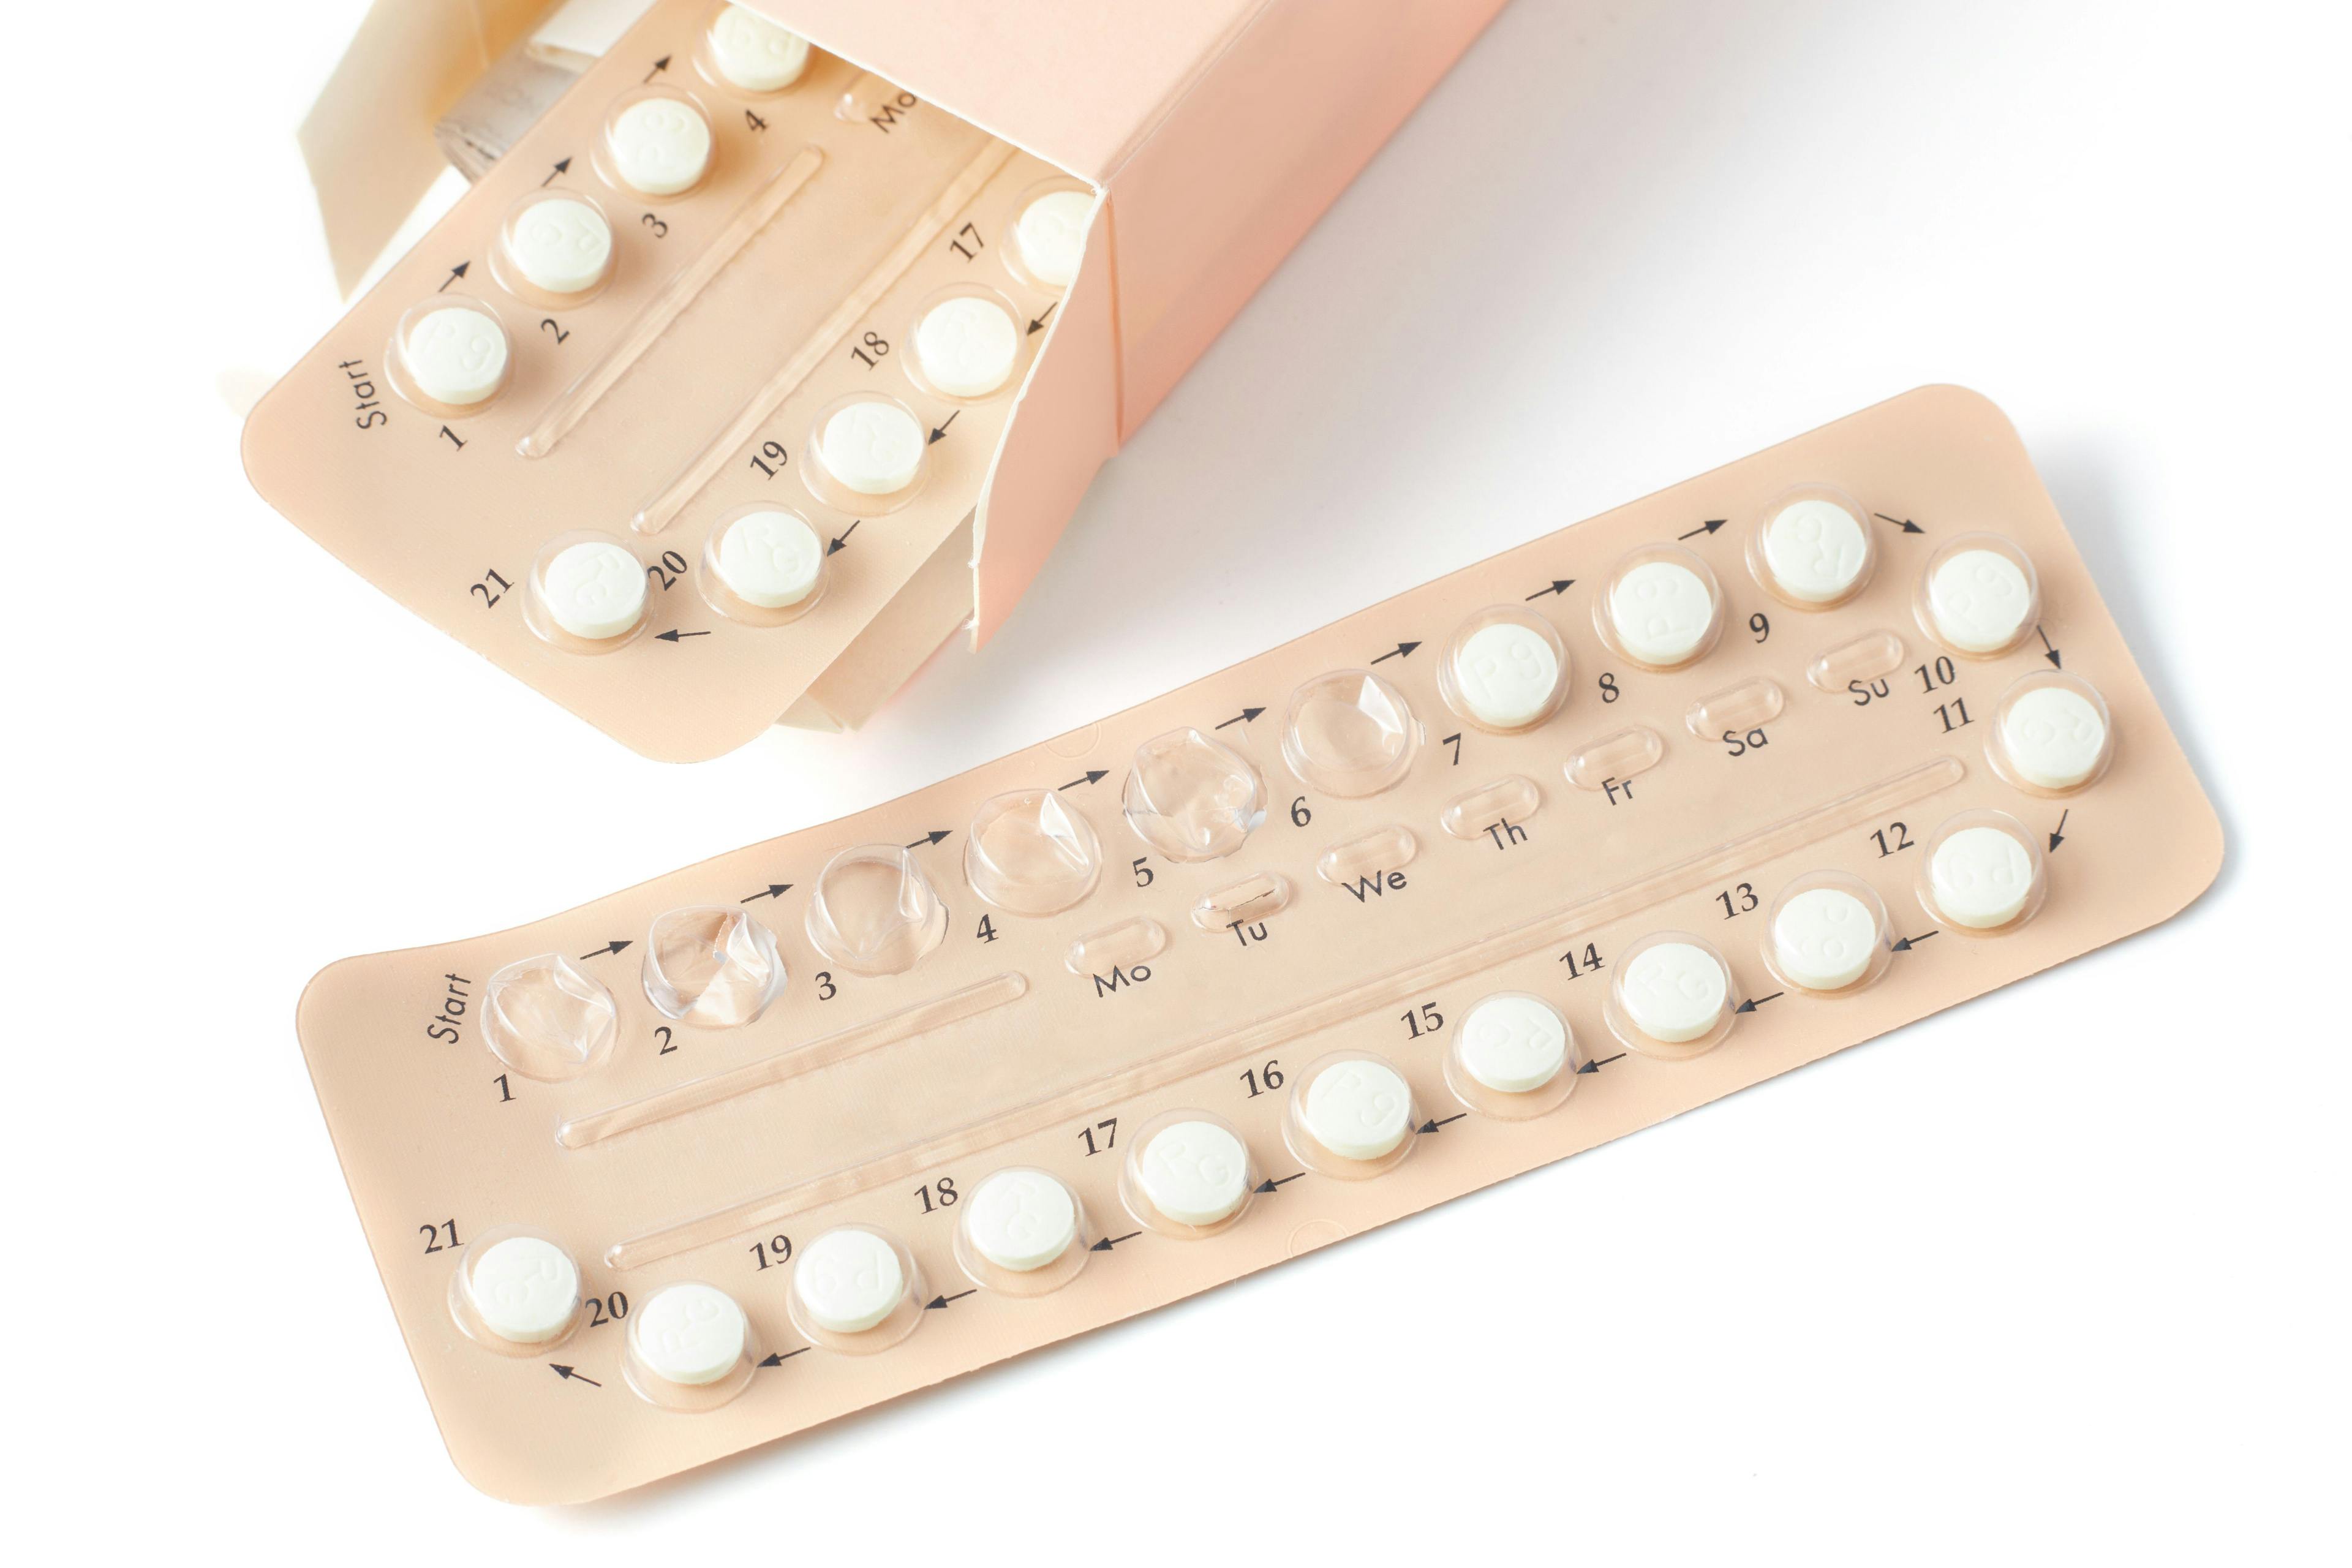 Pharmacist Contraceptive Counseling, Education Can Reduce Access Inequities 